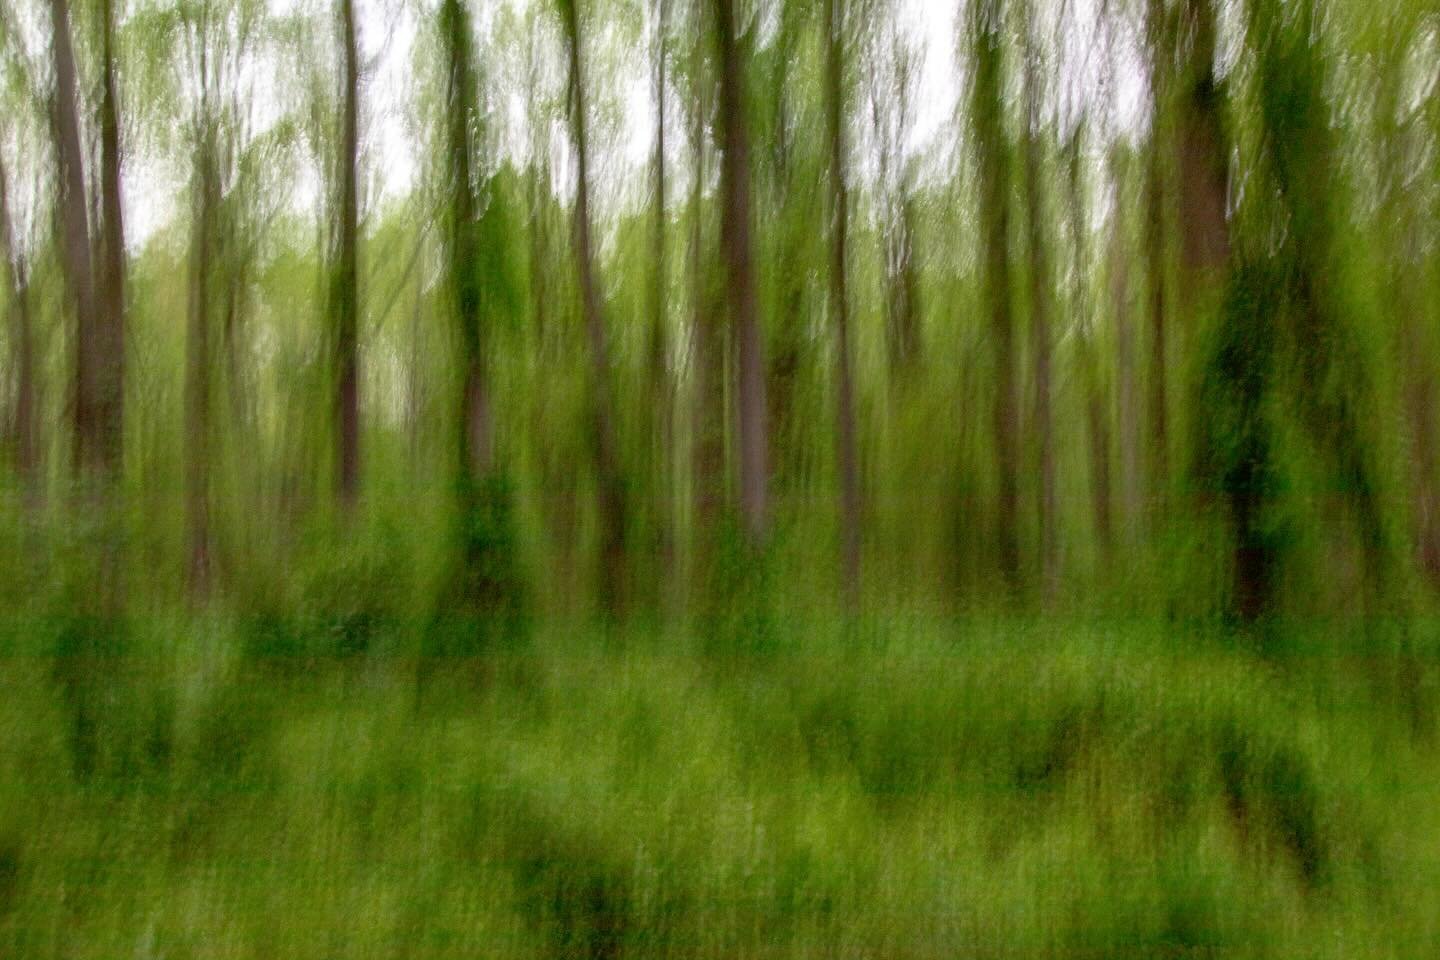 So much green!  This is my favorite time of the year, when you barely blink and everything has turned that beautifully bright shade of green.  I wish it could stay this way just a little longer. 

#intentionalcameramovement
#icm_community
#icm_world
